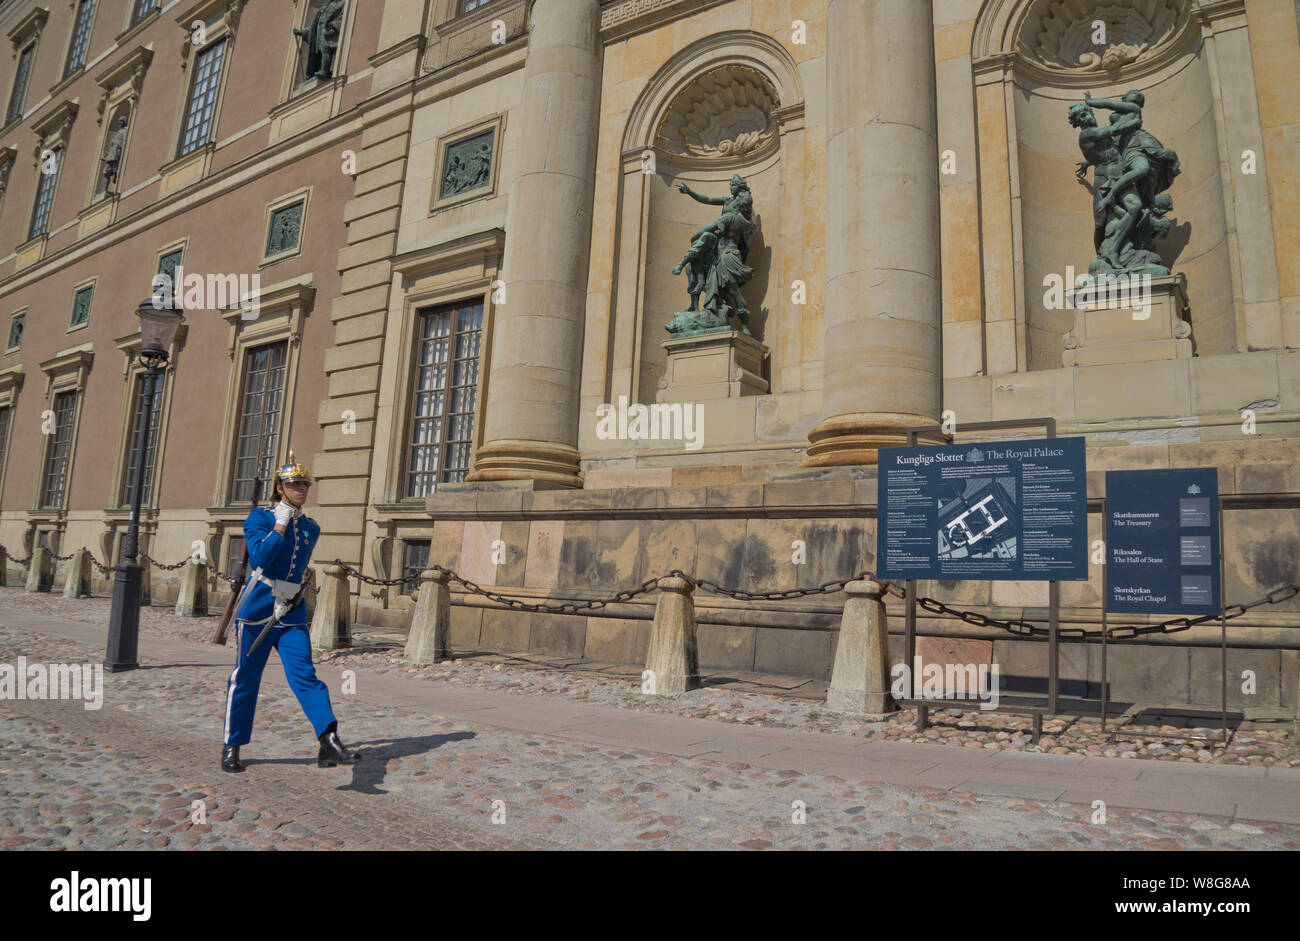 Guard in ceremonial uniform outside the Royal Palace in Stockholm,Swede Stock Photo